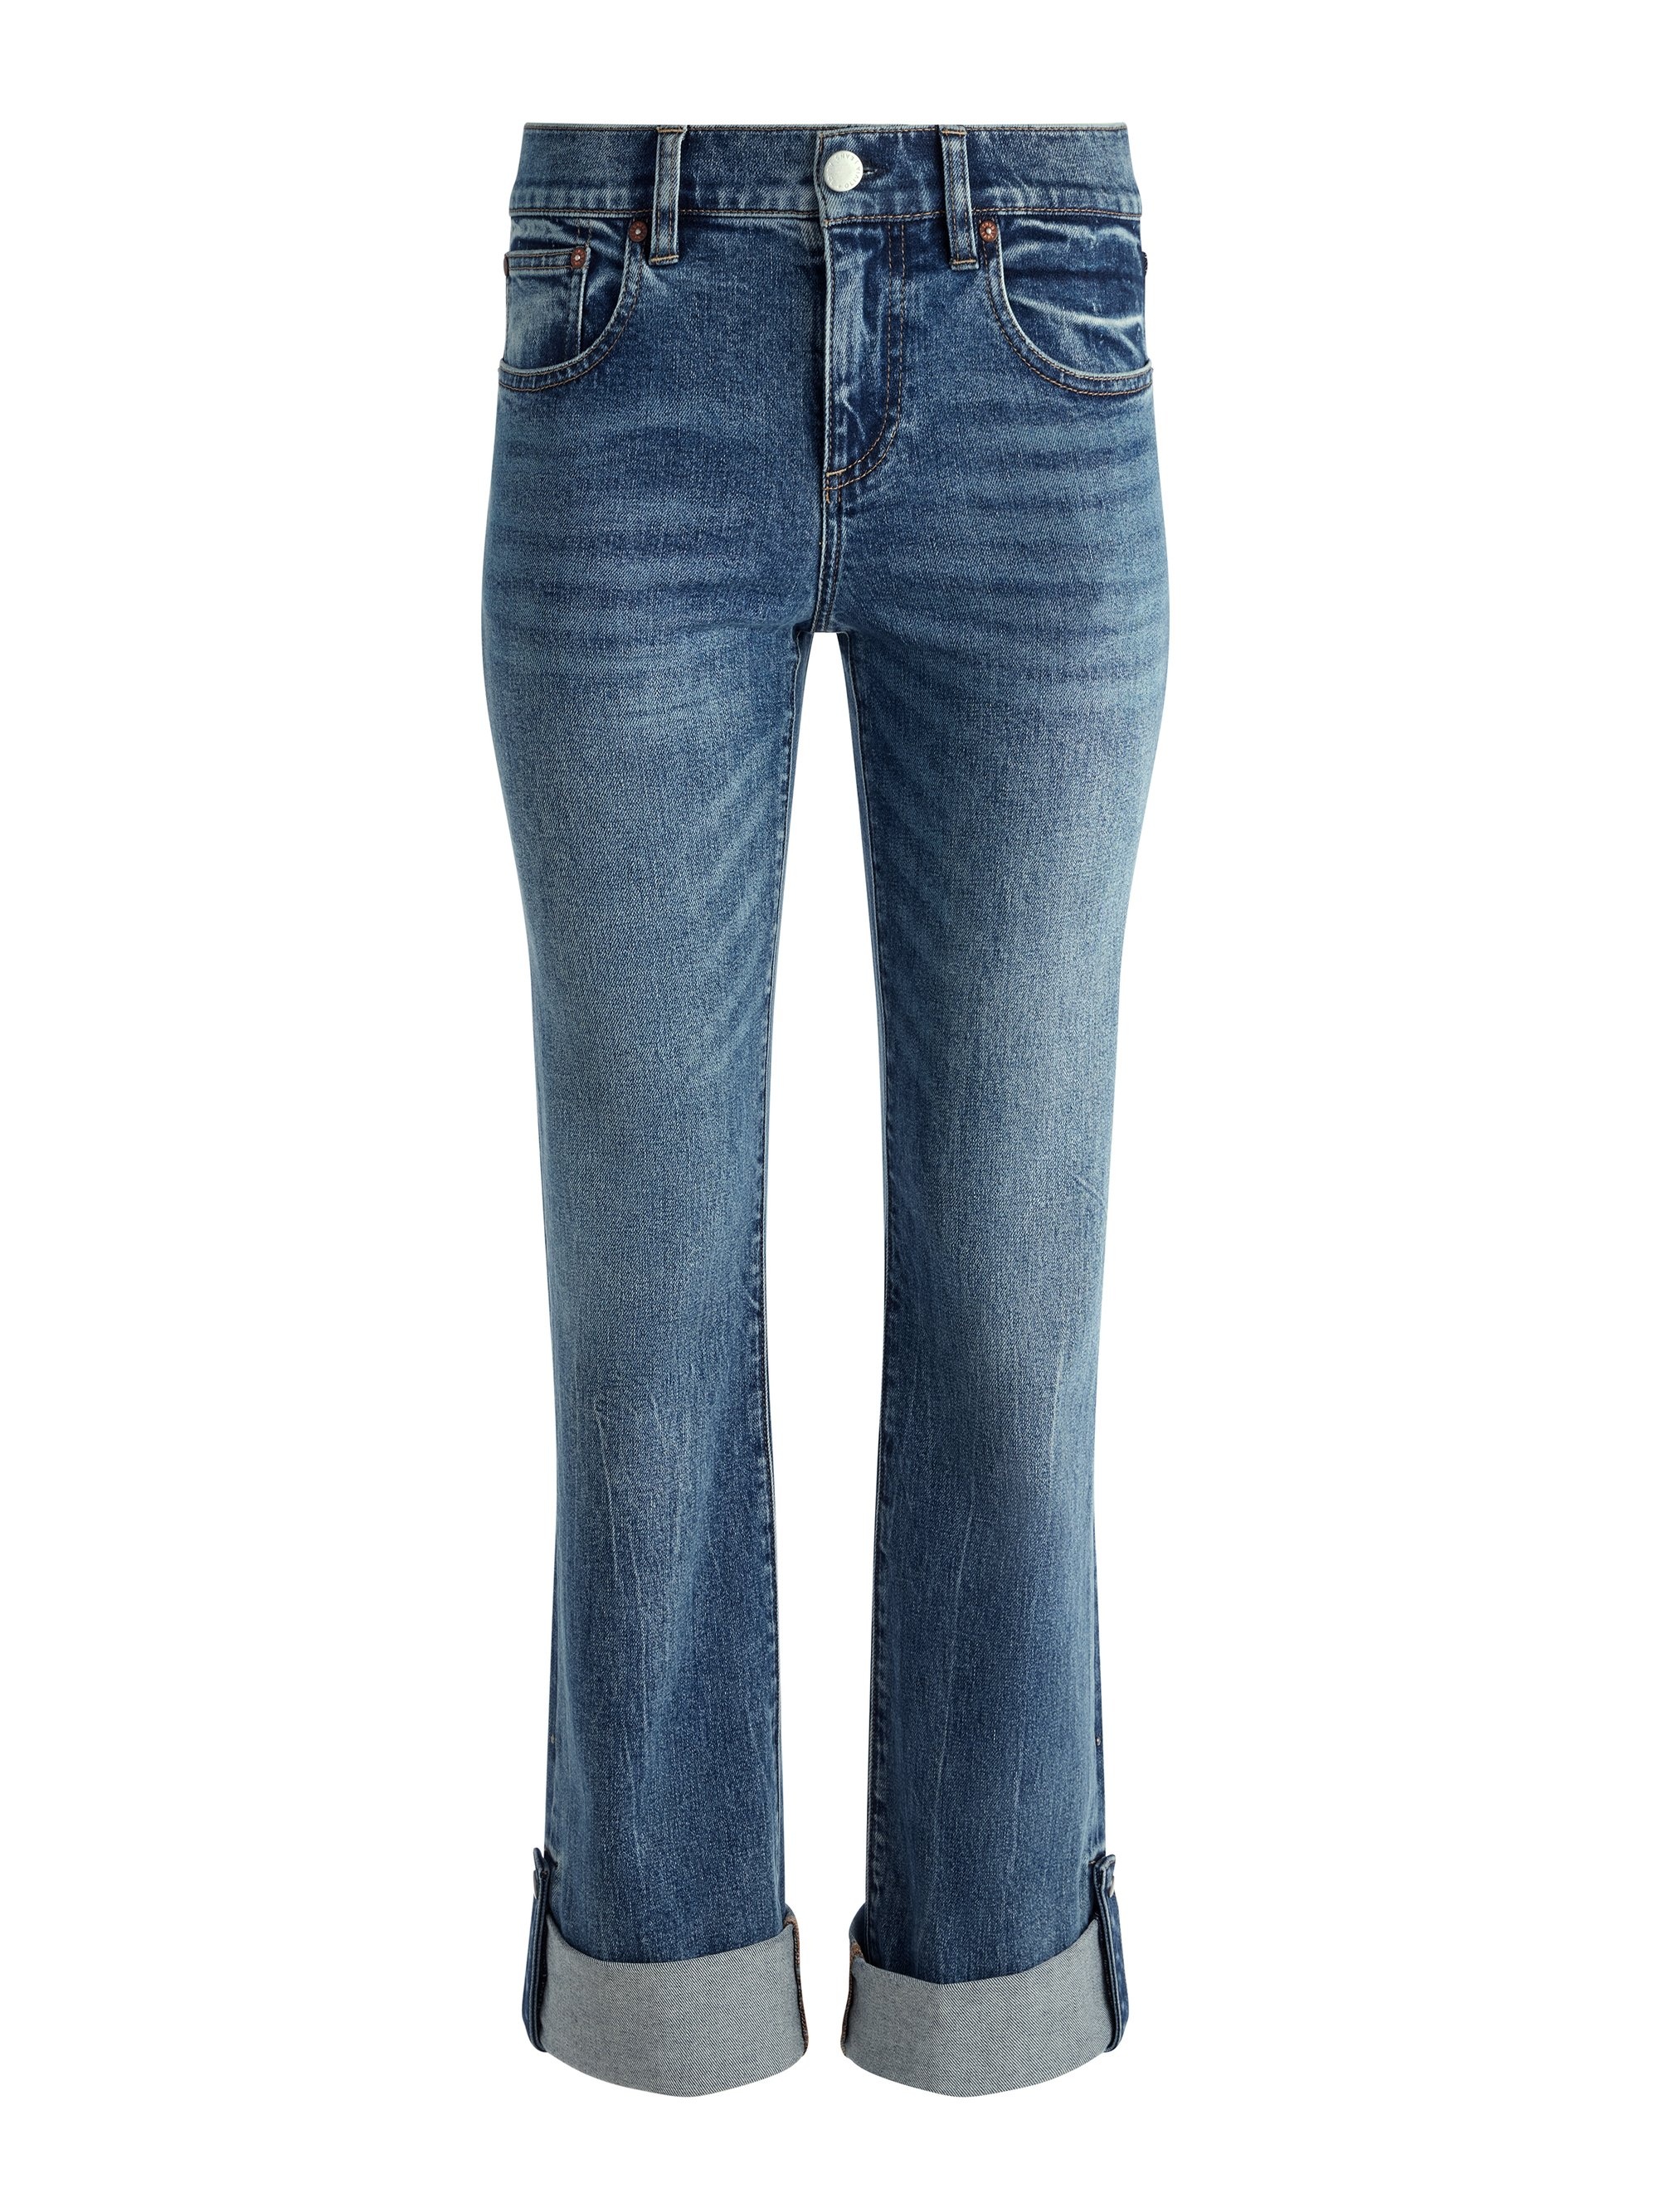 ABILENE LOW RISE CUFFED JEAN WITH SNAPS - 1